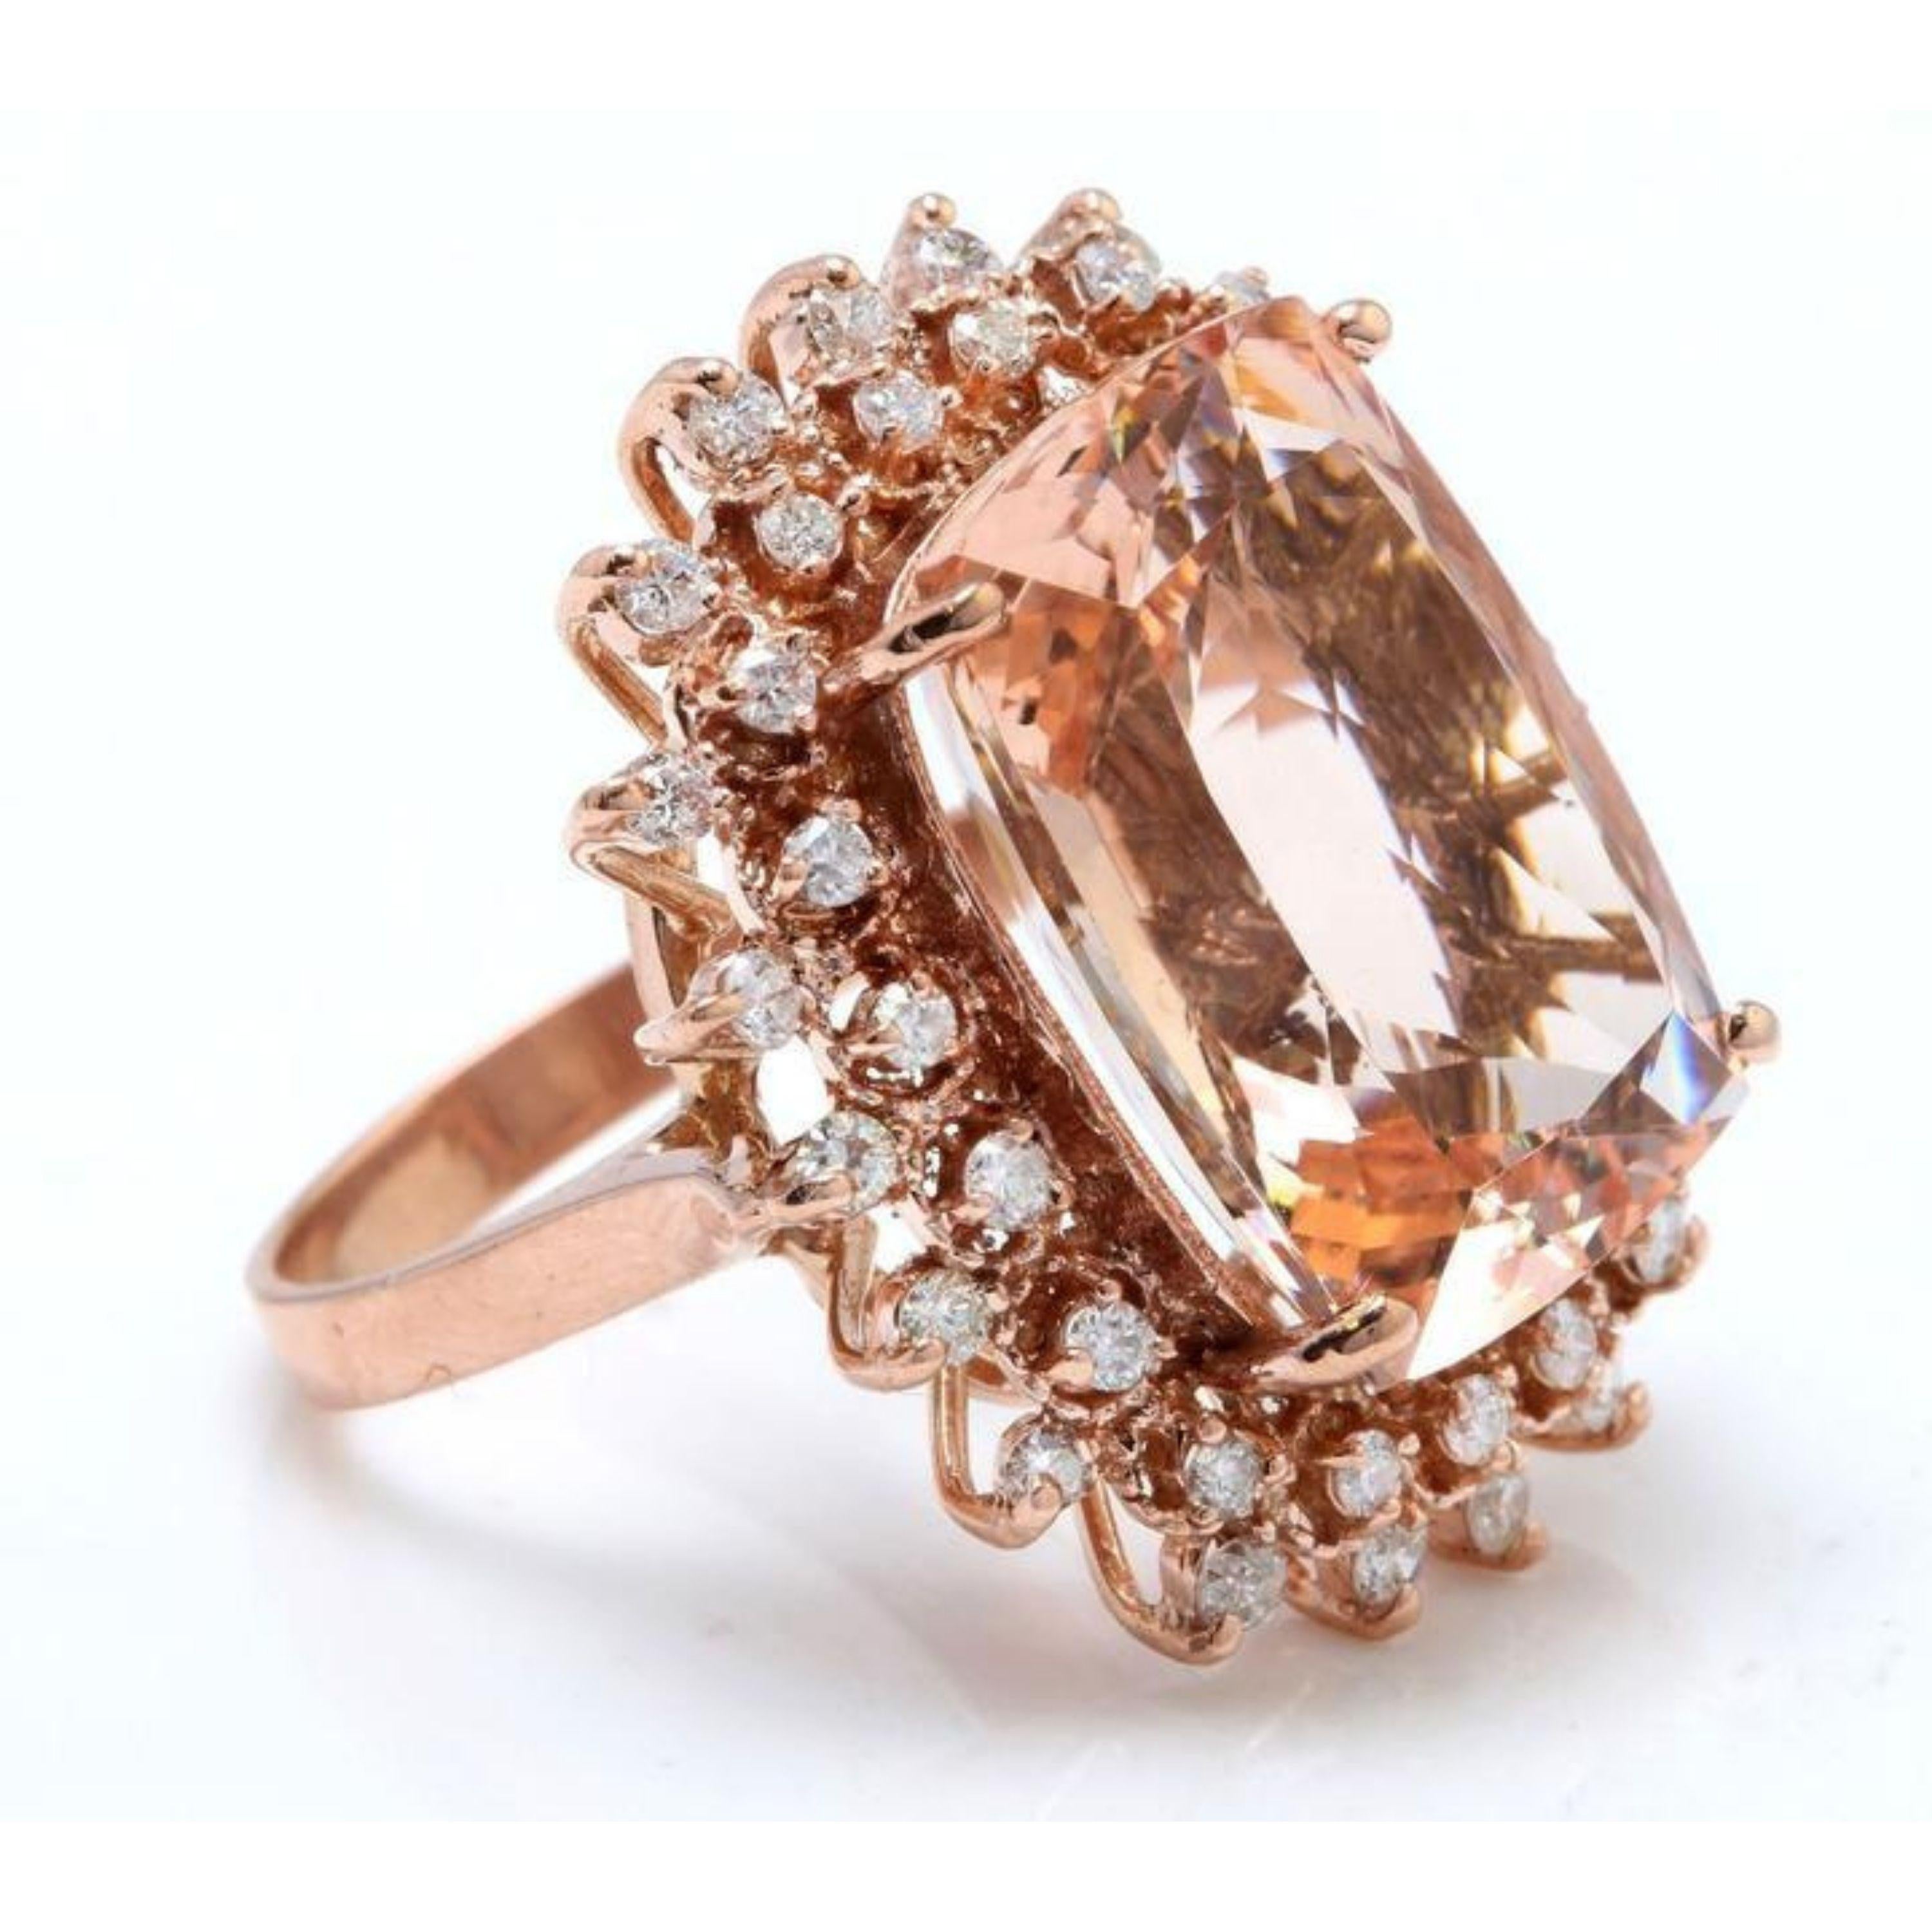 19.20 Carats Exquisite Natural Peach Morganite and Diamond 14K Solid Rose Gold Ring

Total Natural Morganite Weight: 18.00 Carats

Morganite Measures: 18.88 x 14.00mm

Head of the ring measures: 28.11 x 24.15mm

Natural Round Diamonds Weight: 1.20